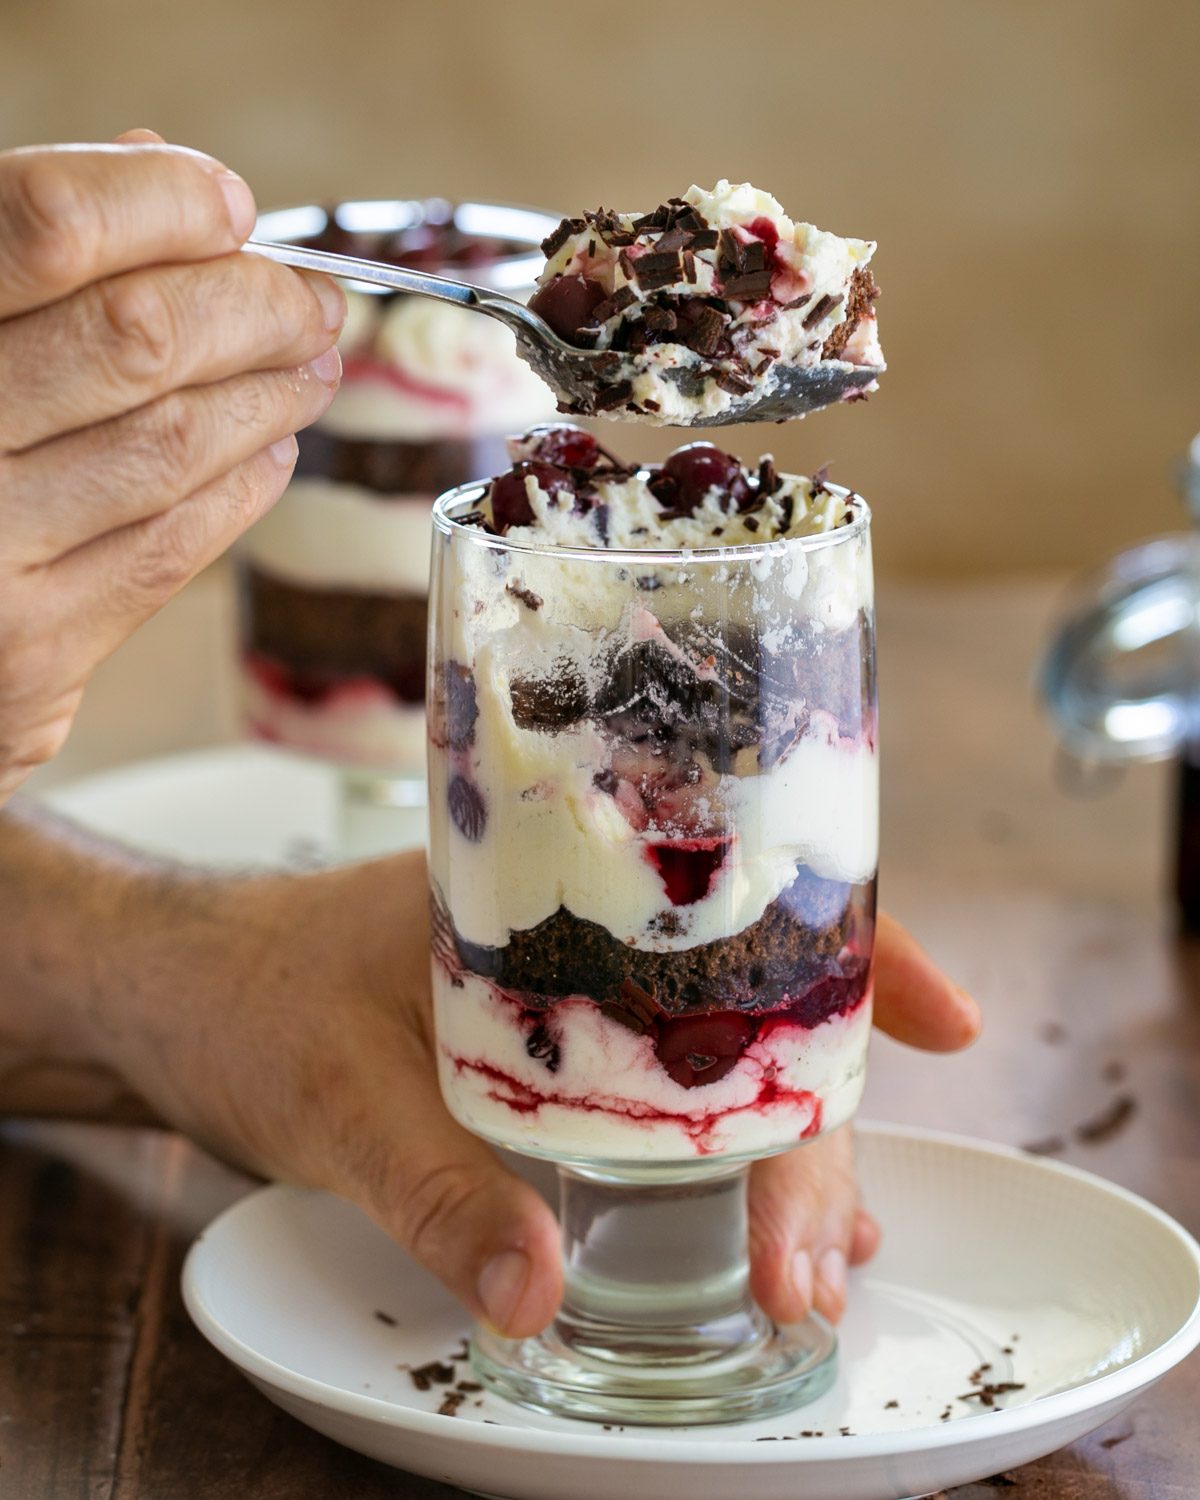 Spoon full of black forest cake in glass